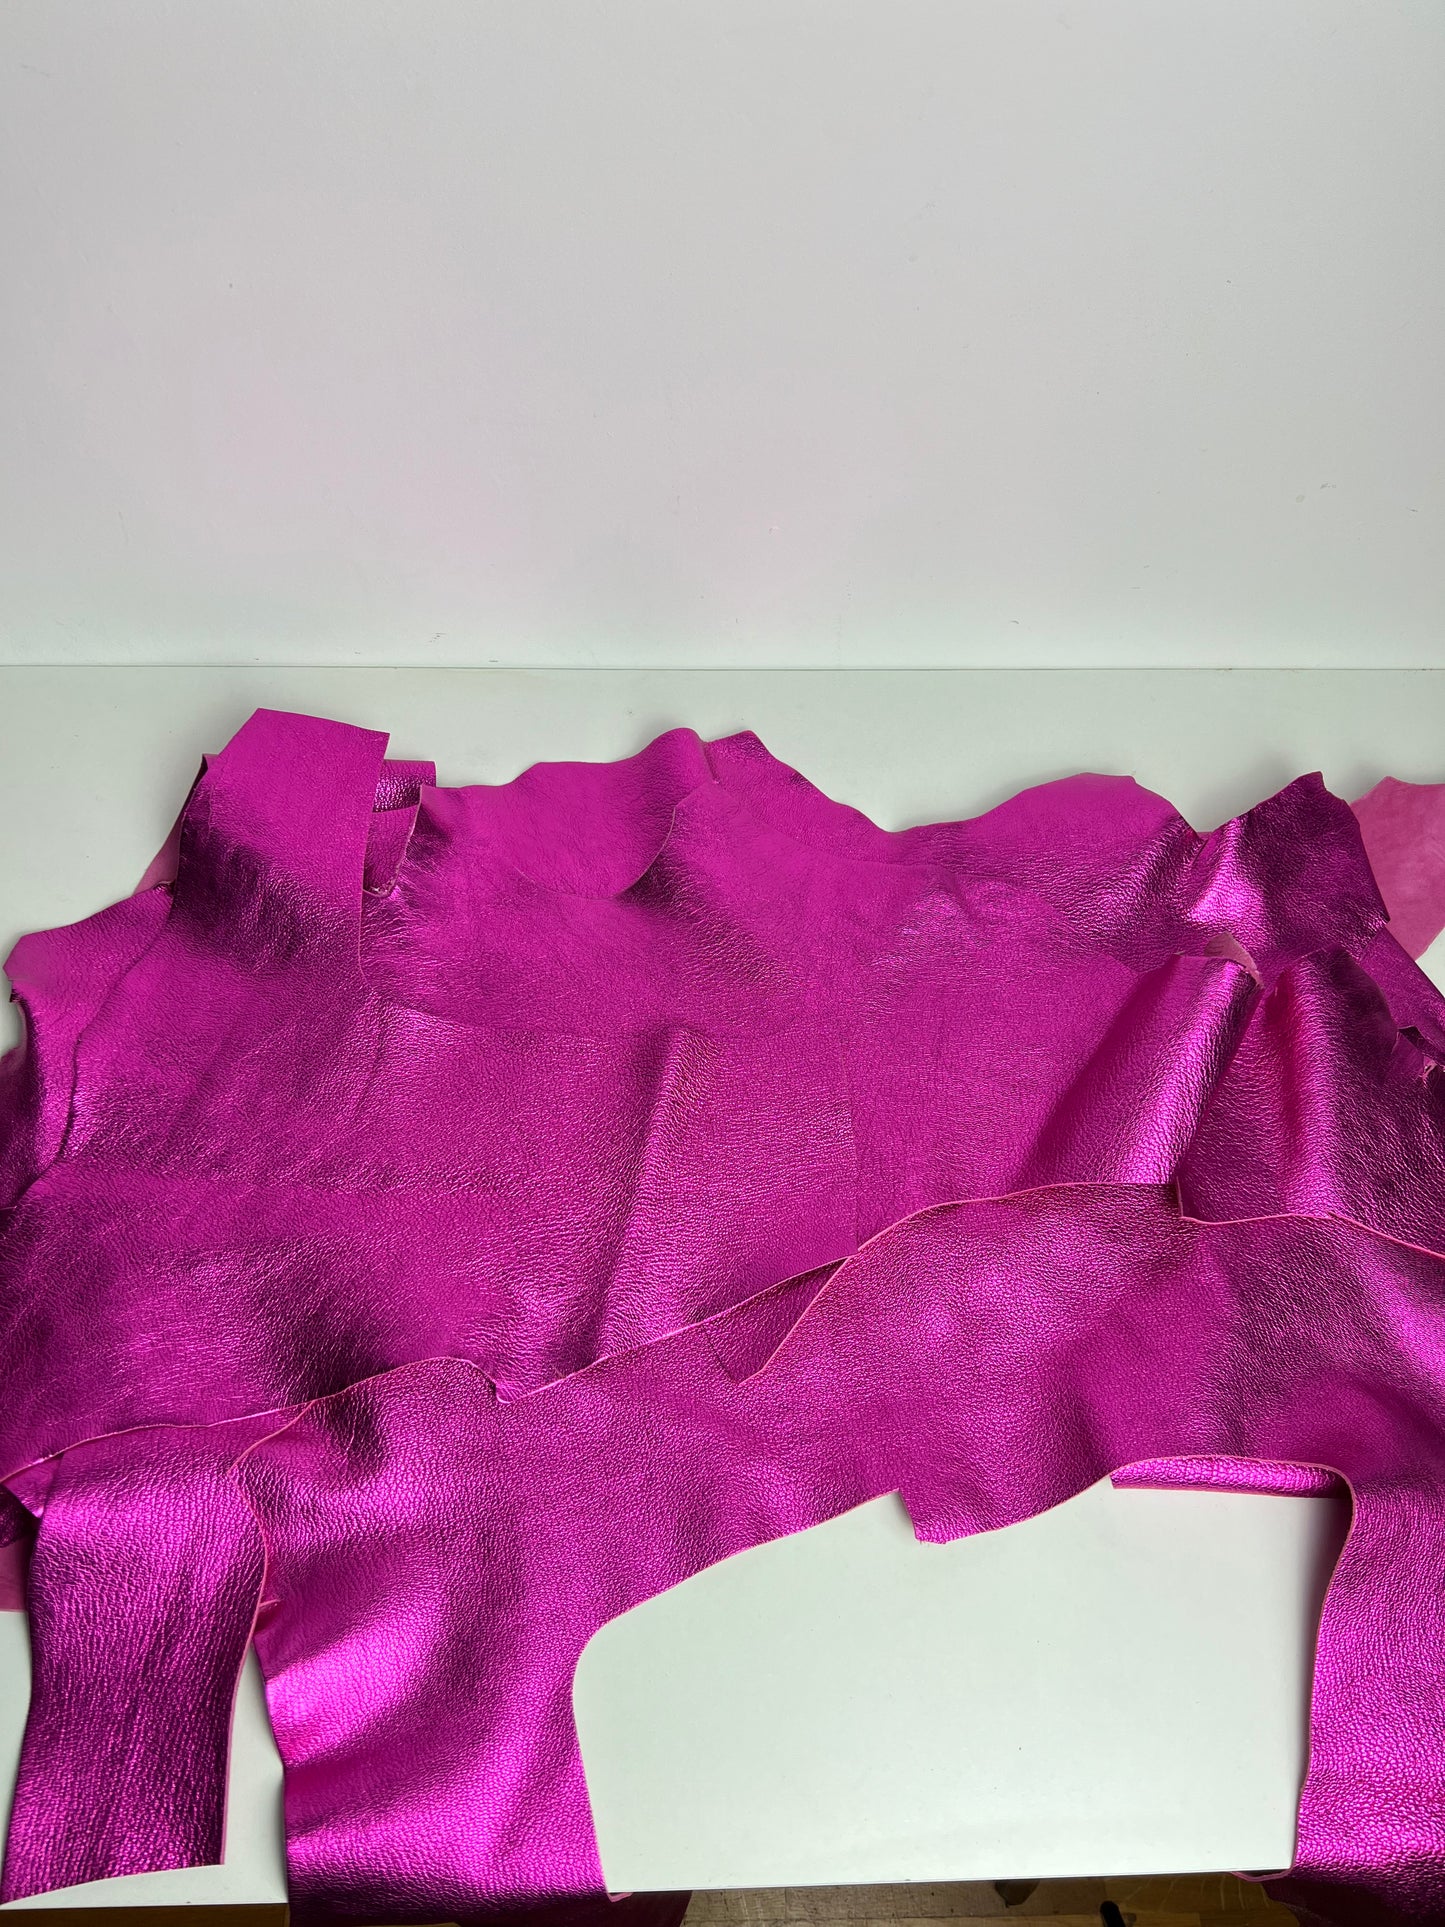 Pieces of Leather, Medium and Large pieces, Color Pink, Nice finish look | 0.8 kg | 1.8 lb